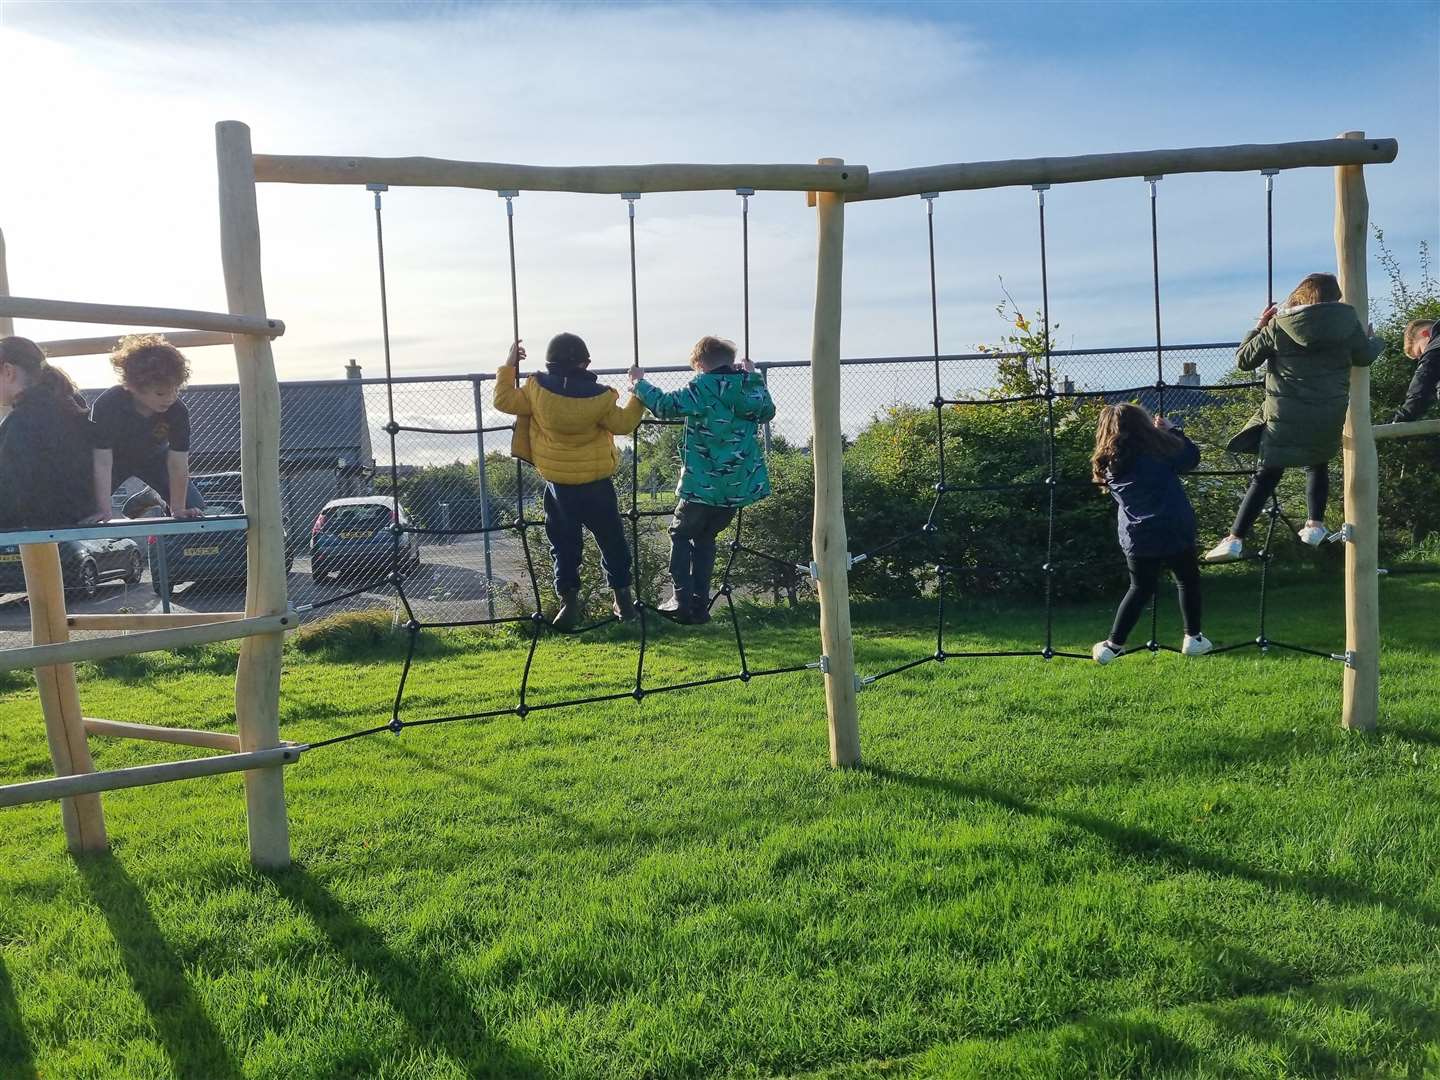 Pupils at Halkirk Primary School enjoy a turn on the new trim trail.